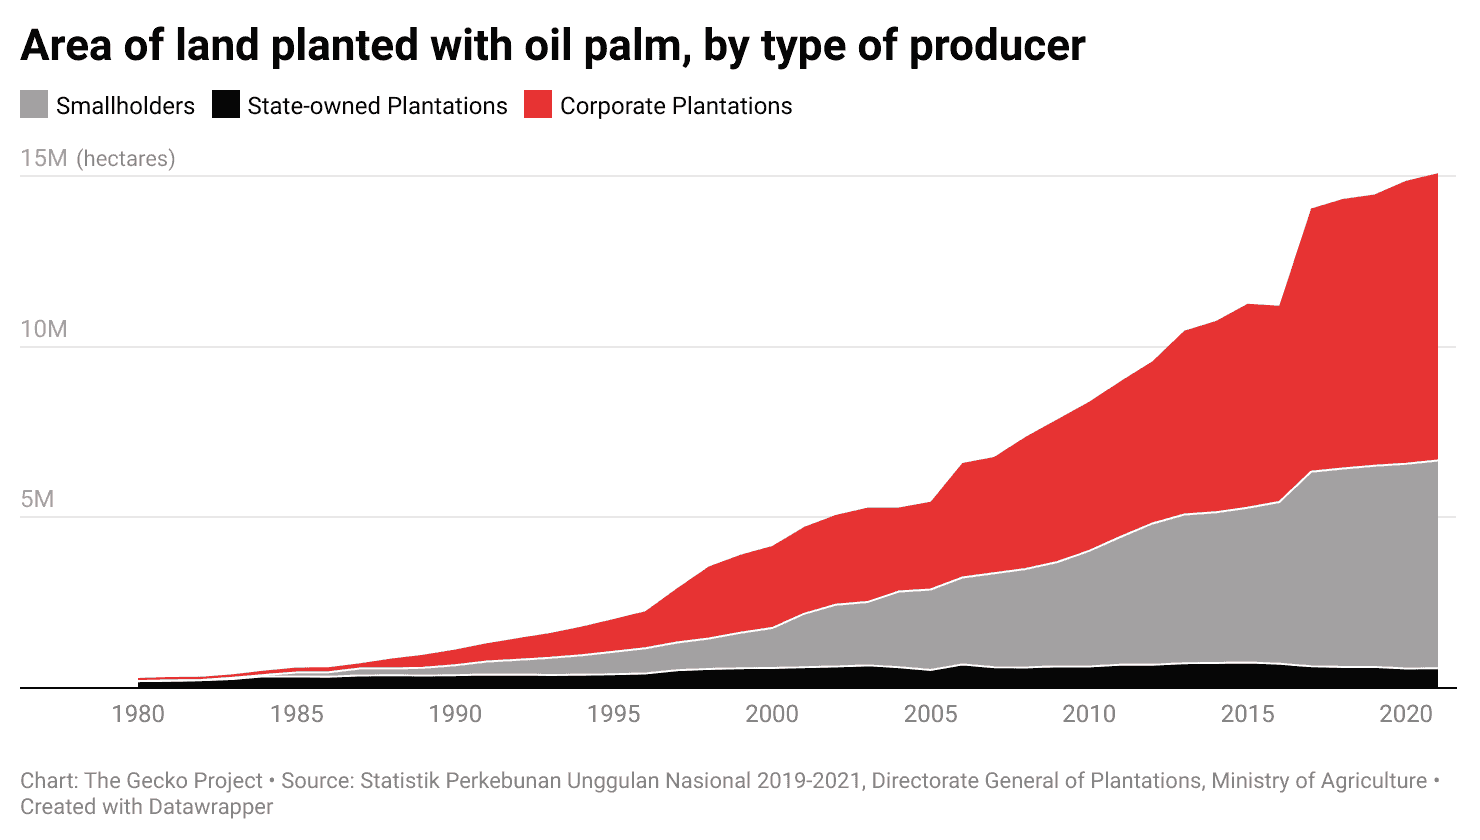 The area of land planted with oil palms in Indonesia expanded rapidly from the mid-1990s. Smallholders accounted for a significant portion of this growth. In this government data, the category “Smallholders” includes both farmers involved in plasma schemes and smallholders who developed their own land independently of plantation companies.